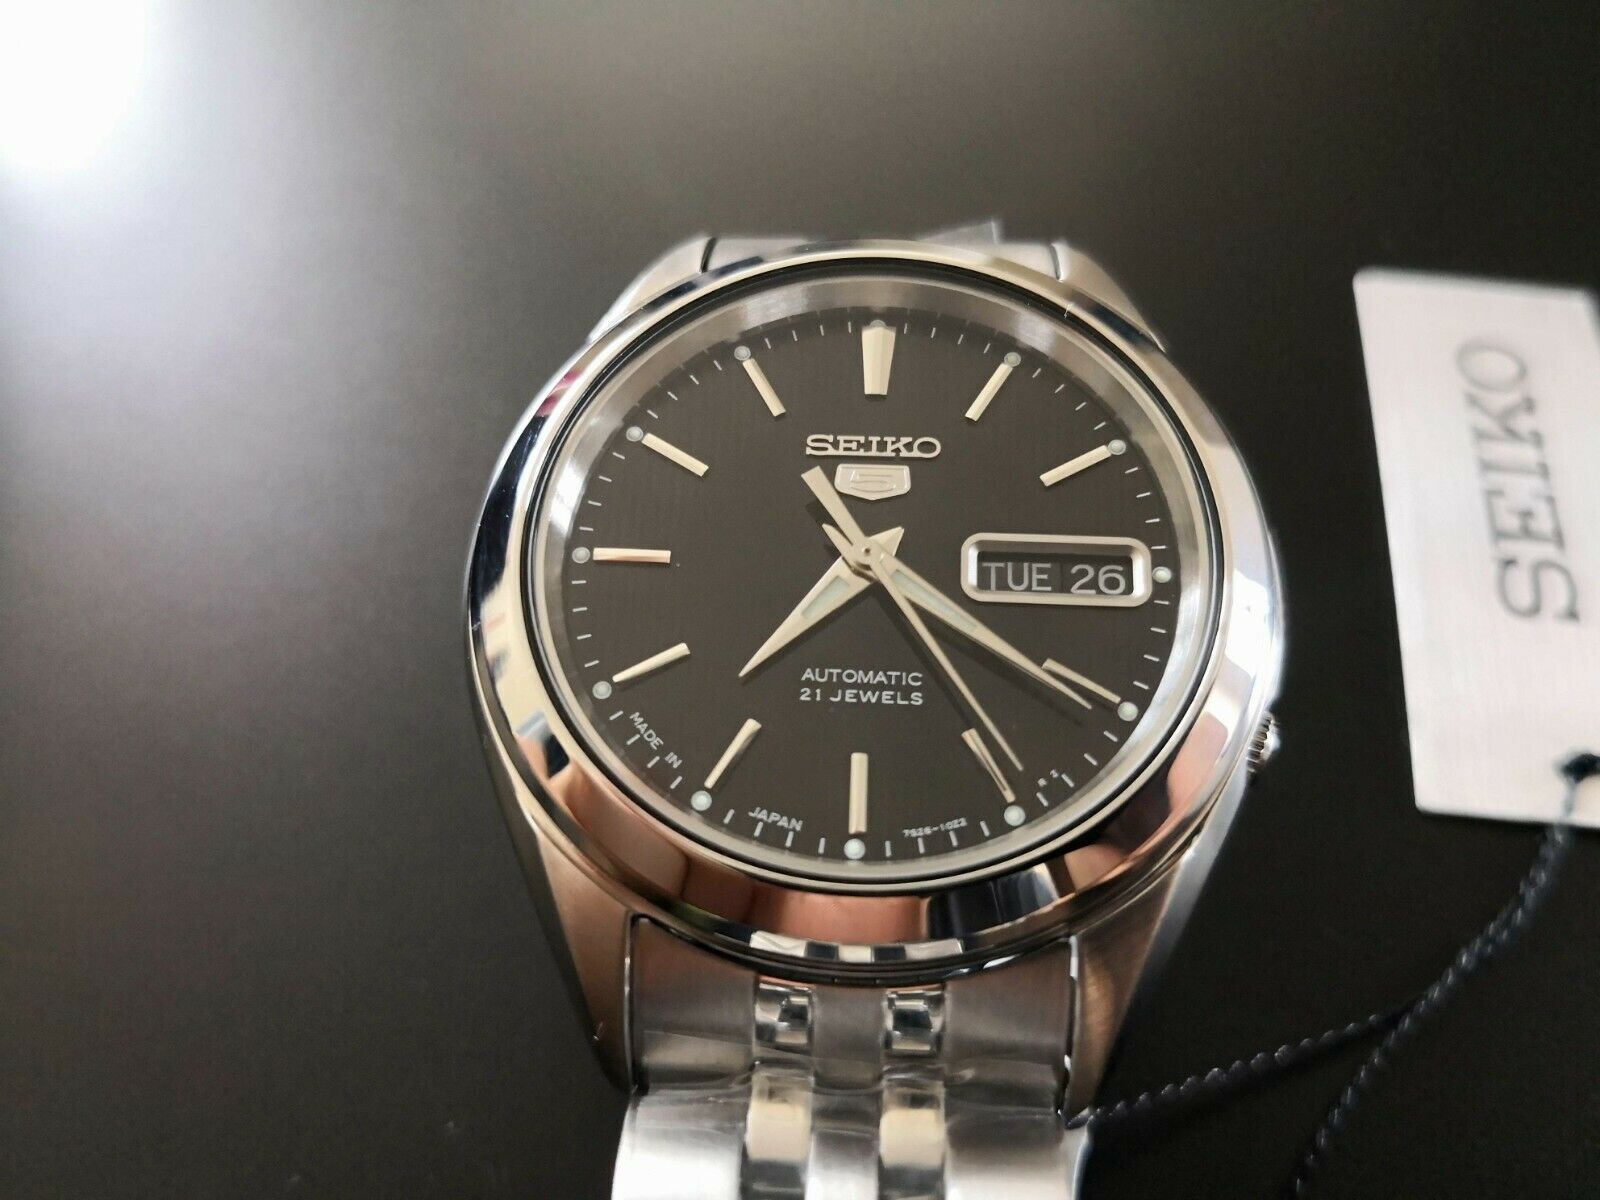 Seiko 5 SNKL23 J1 Hodinkee Rare Automatic Watch made in Japan | WatchCharts